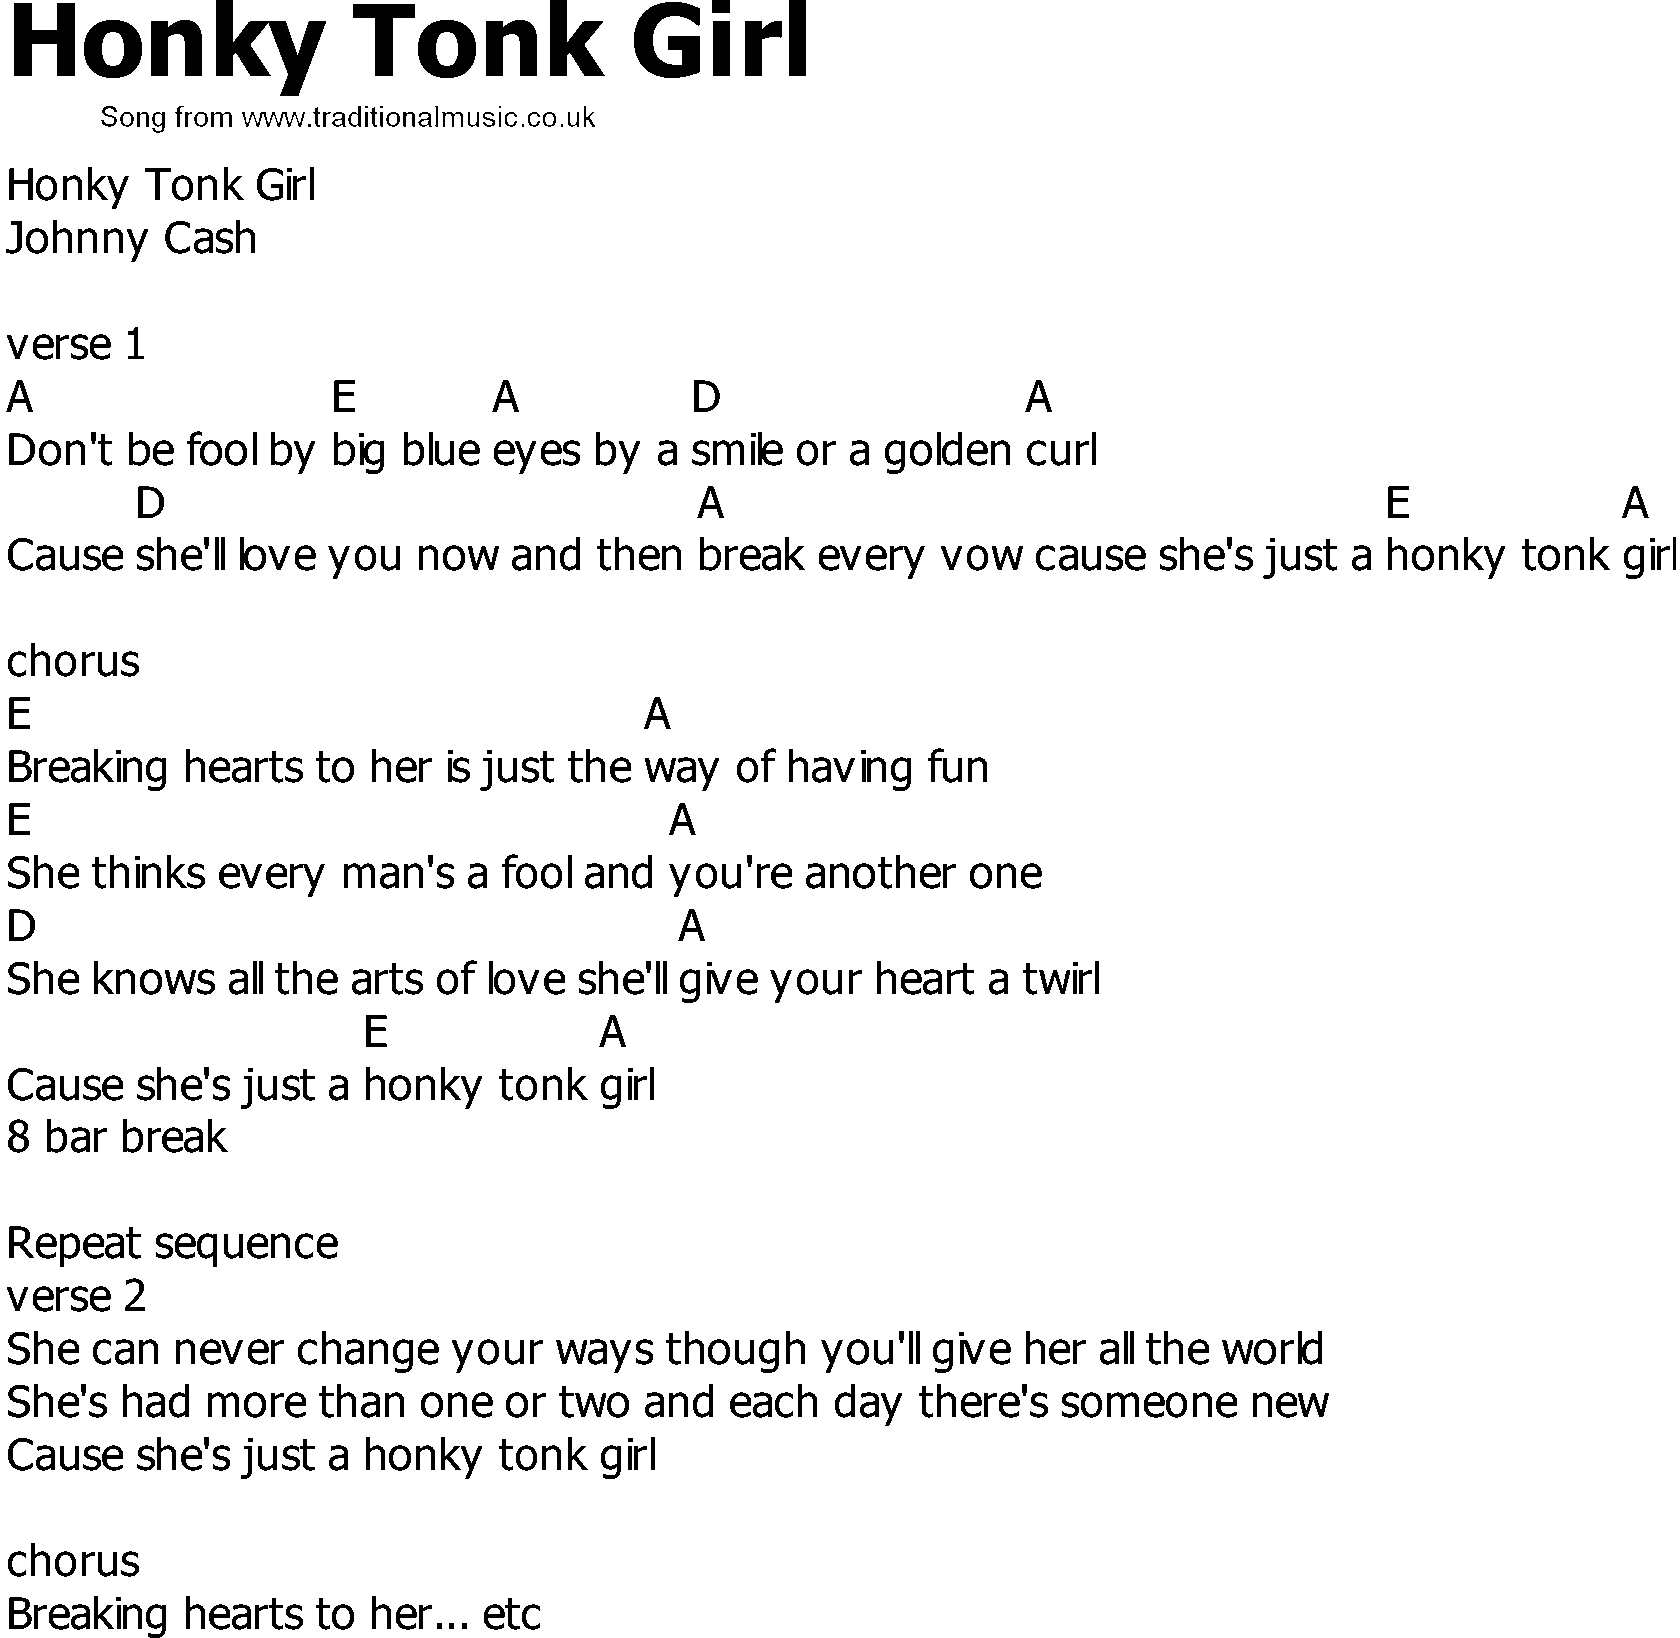 Old Country song lyrics with chords - Honky Tonk Girl